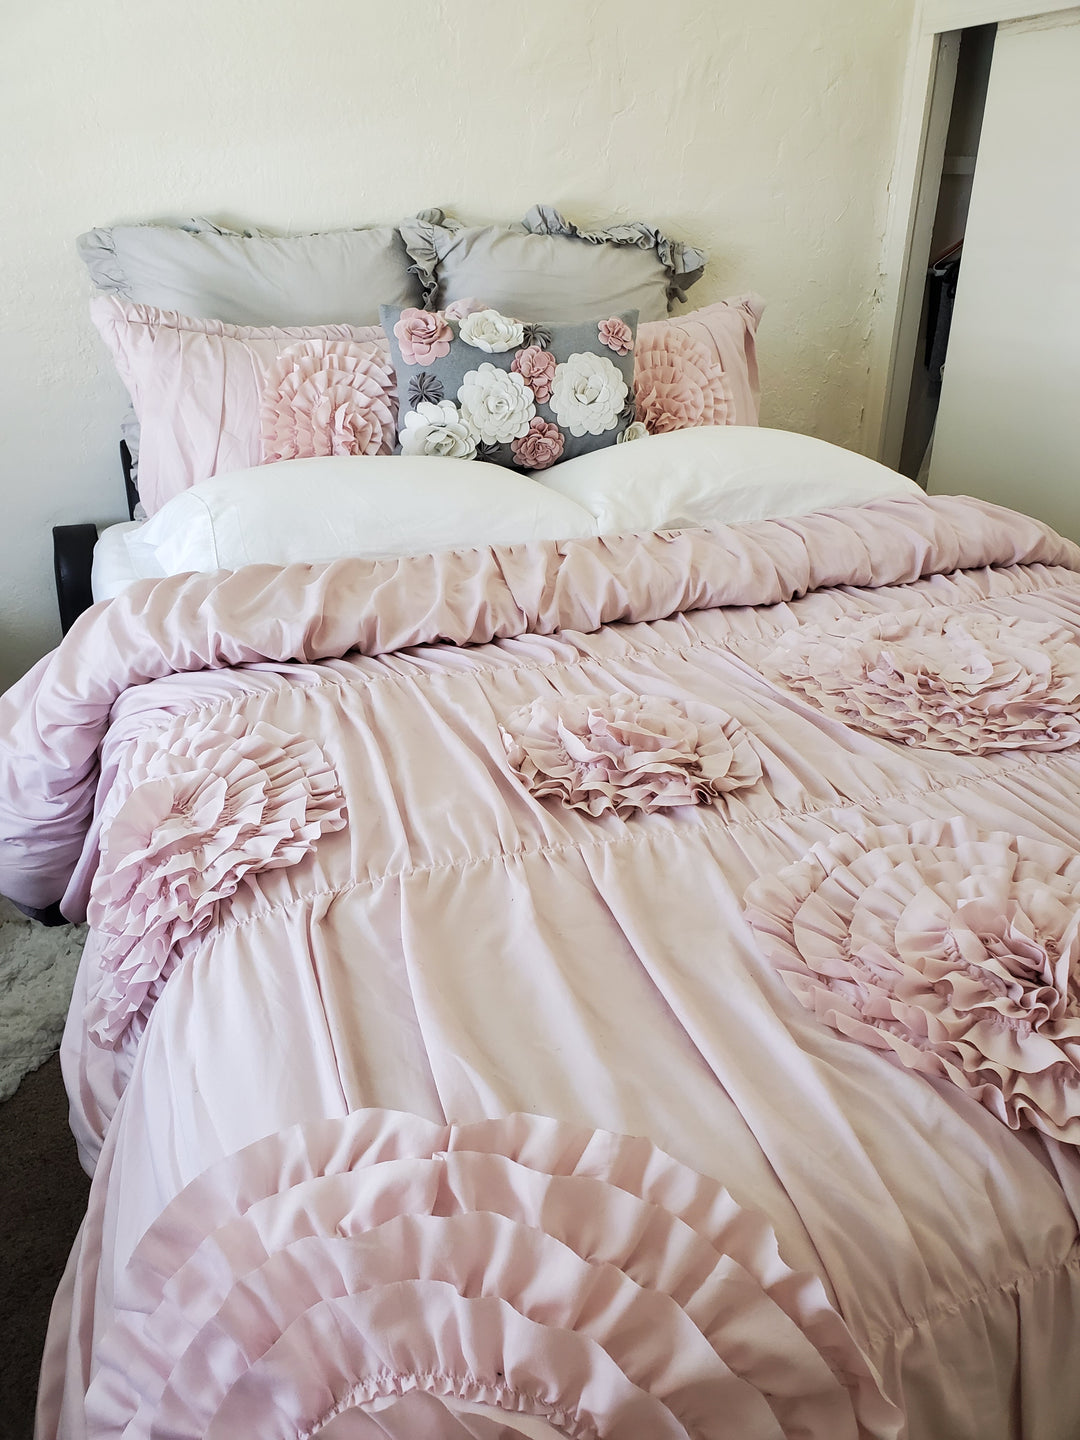  Sunham 3-Piece Pink Blush Gray White Floral Full Queen Comforter  Set with 2 Shams Big Flowers : Home & Kitchen